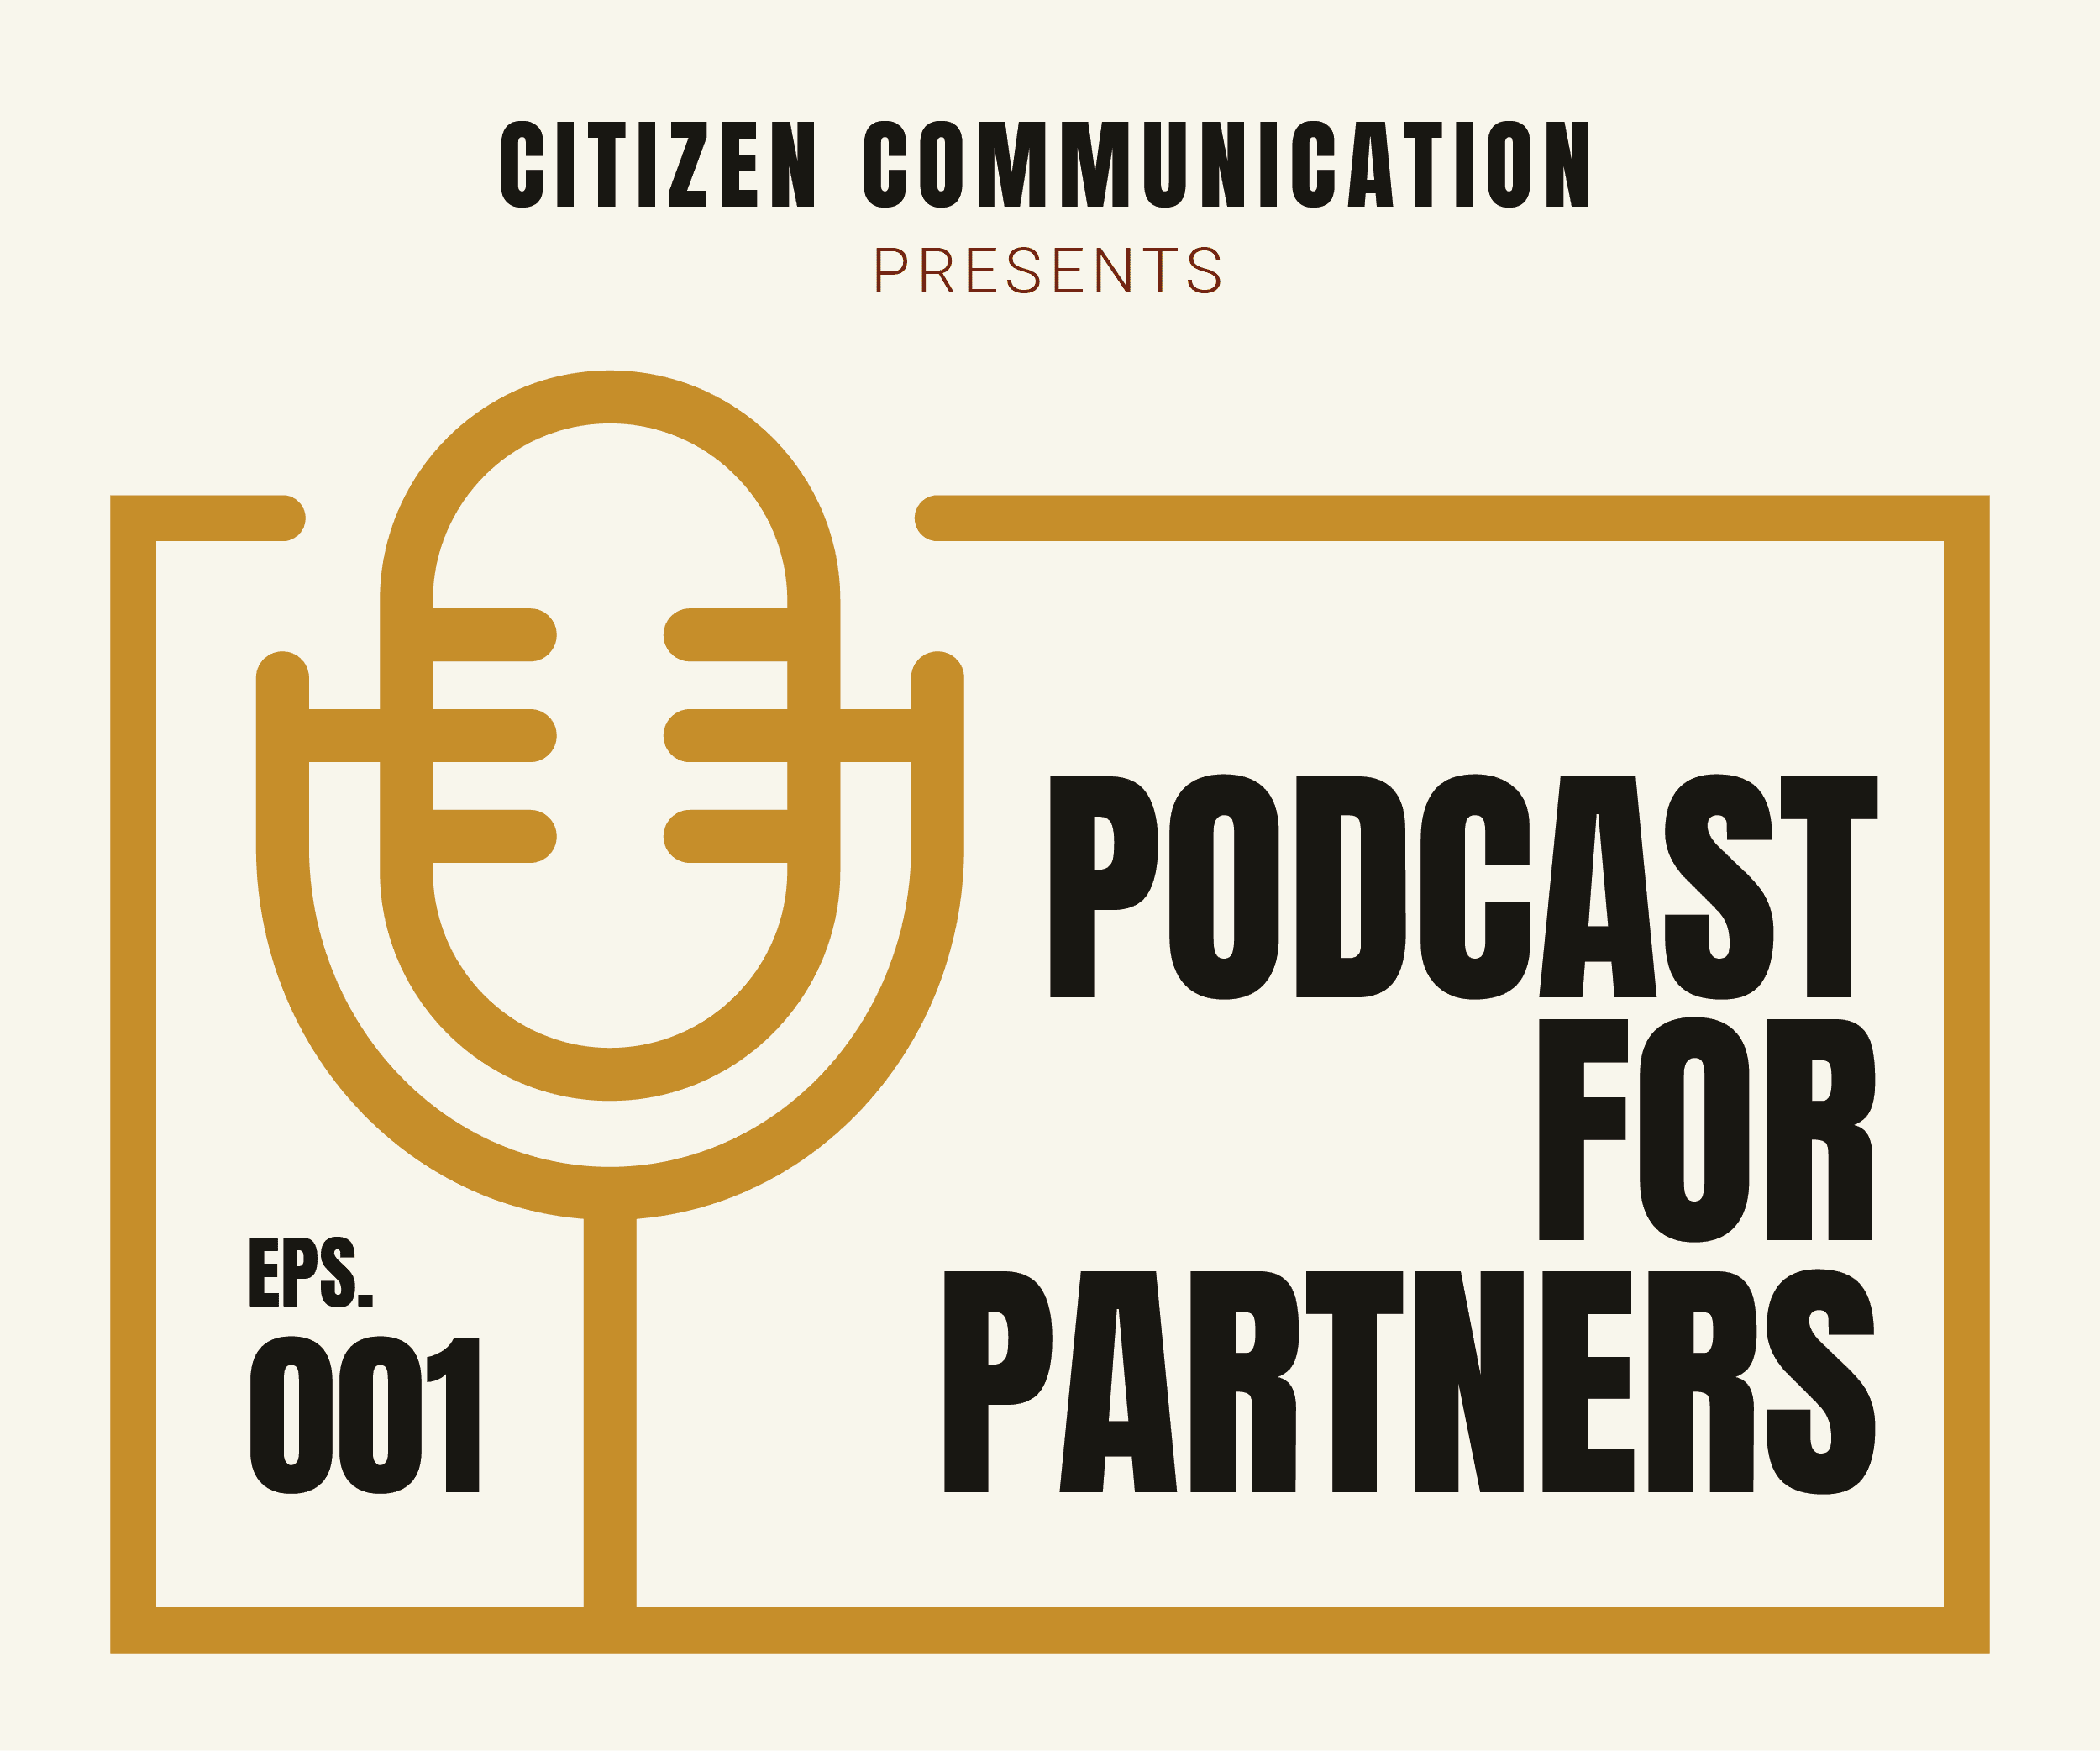 Podcast For Partners Blog 1200 Wide 01